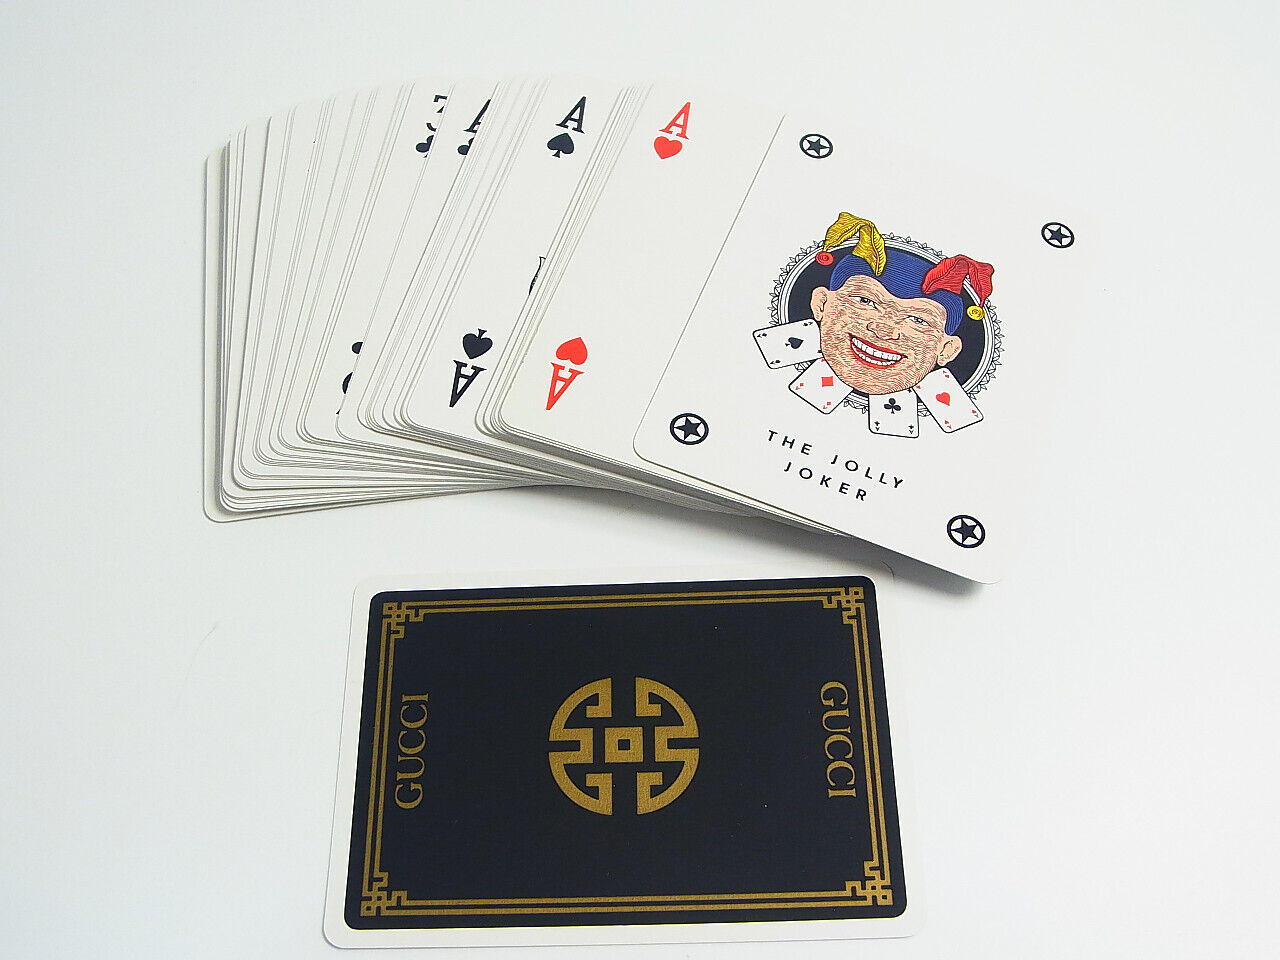 Auth GUCCI One Deck Playing Cards Complete Excellent no box